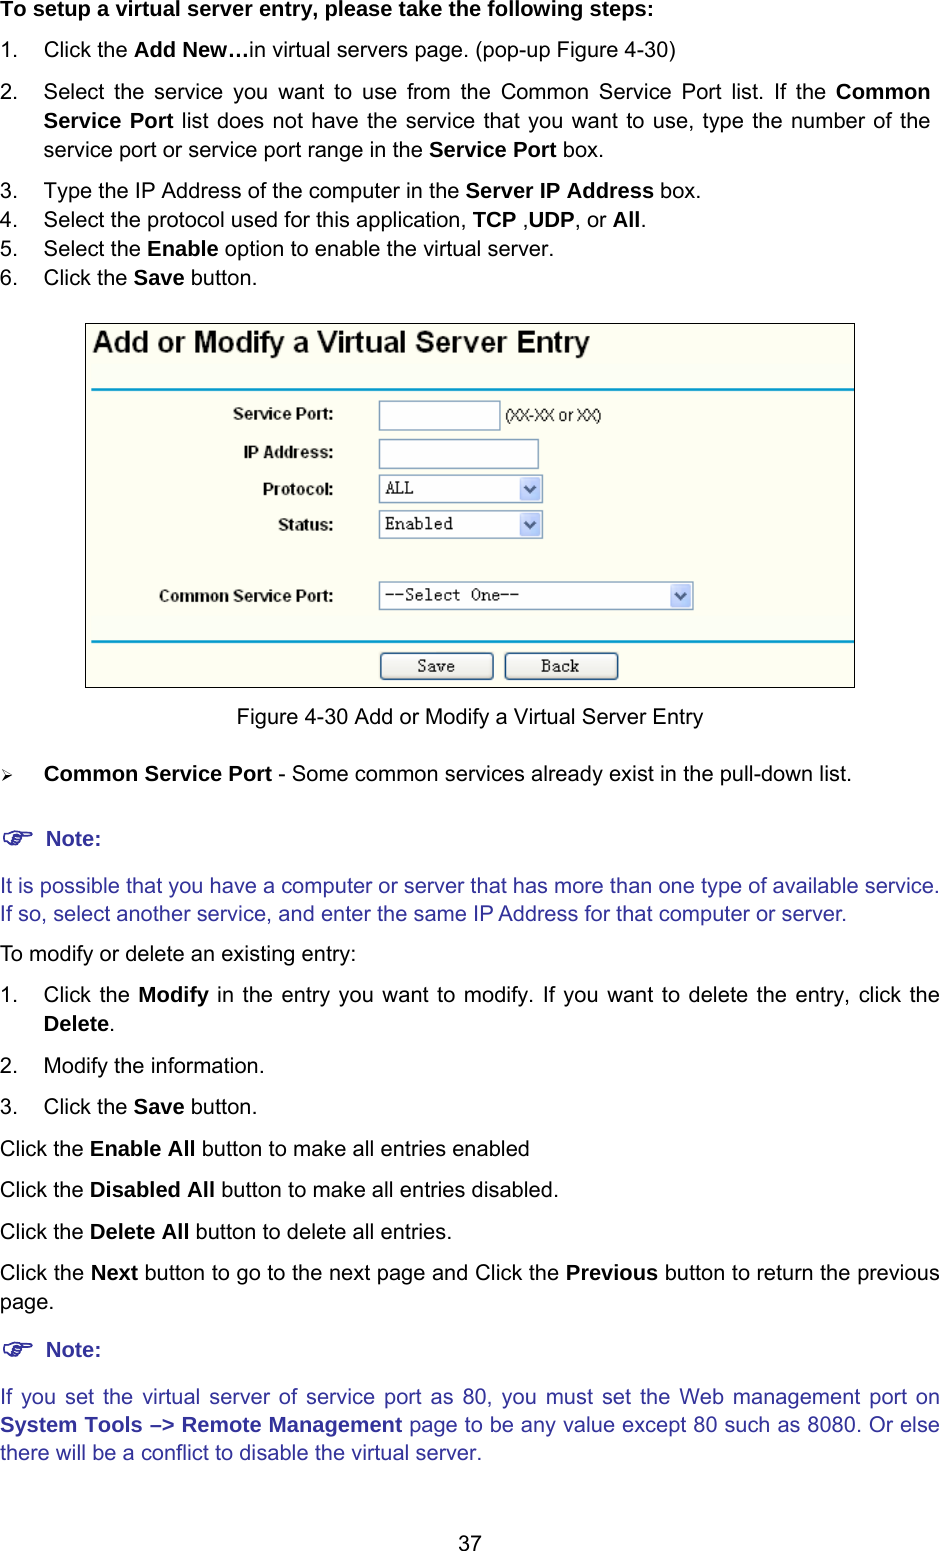  37 To setup a virtual server entry, please take the following steps:  1. Click the Add New…in virtual servers page. (pop-up Figure 4-30) 2.  Select the service you want to use from the Common Service Port list. If the Common Service Port list does not have the service that you want to use, type the number of the service port or service port range in the Service Port box. 3.  Type the IP Address of the computer in the Server IP Address box.  4.  Select the protocol used for this application, TCP ,UDP, or All. 5. Select the Enable option to enable the virtual server. 6. Click the Save button.    Figure 4-30 Add or Modify a Virtual Server Entry ¾ Common Service Port - Some common services already exist in the pull-down list.  ) Note: It is possible that you have a computer or server that has more than one type of available service. If so, select another service, and enter the same IP Address for that computer or server. To modify or delete an existing entry:   1. Click the Modify in the entry you want to modify. If you want to delete the entry, click the Delete. 2.  Modify the information.   3. Click the Save button. Click the Enable All button to make all entries enabled Click the Disabled All button to make all entries disabled. Click the Delete All button to delete all entries. Click the Next button to go to the next page and Click the Previous button to return the previous page. ) Note: If you set the virtual server of service port as 80, you must set the Web management port on System Tools –&gt; Remote Management page to be any value except 80 such as 8080. Or else there will be a conflict to disable the virtual server. 